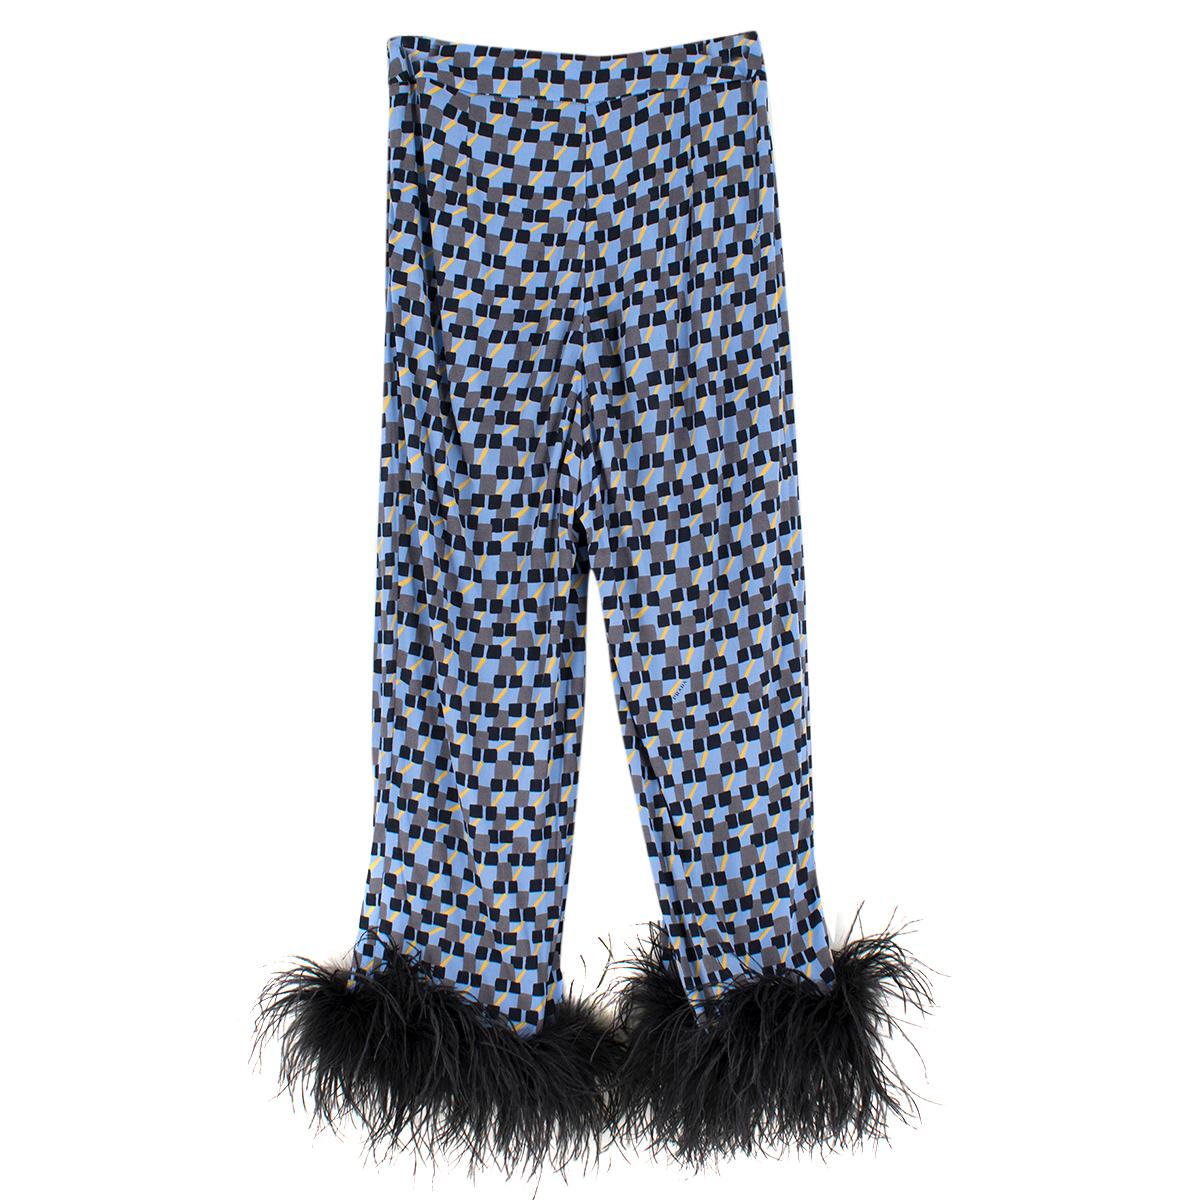 Prada Feather-Trimmed Printed Crepe De Chine Pants

-  High-rise waist and straight-leg silhouette 
- Multi-colored Crepe de Chine in Blue, Black and Yellow Print Pattern  
- Black feathers at the cuffs (Ostrich)
- Concealed hook and zip fastening